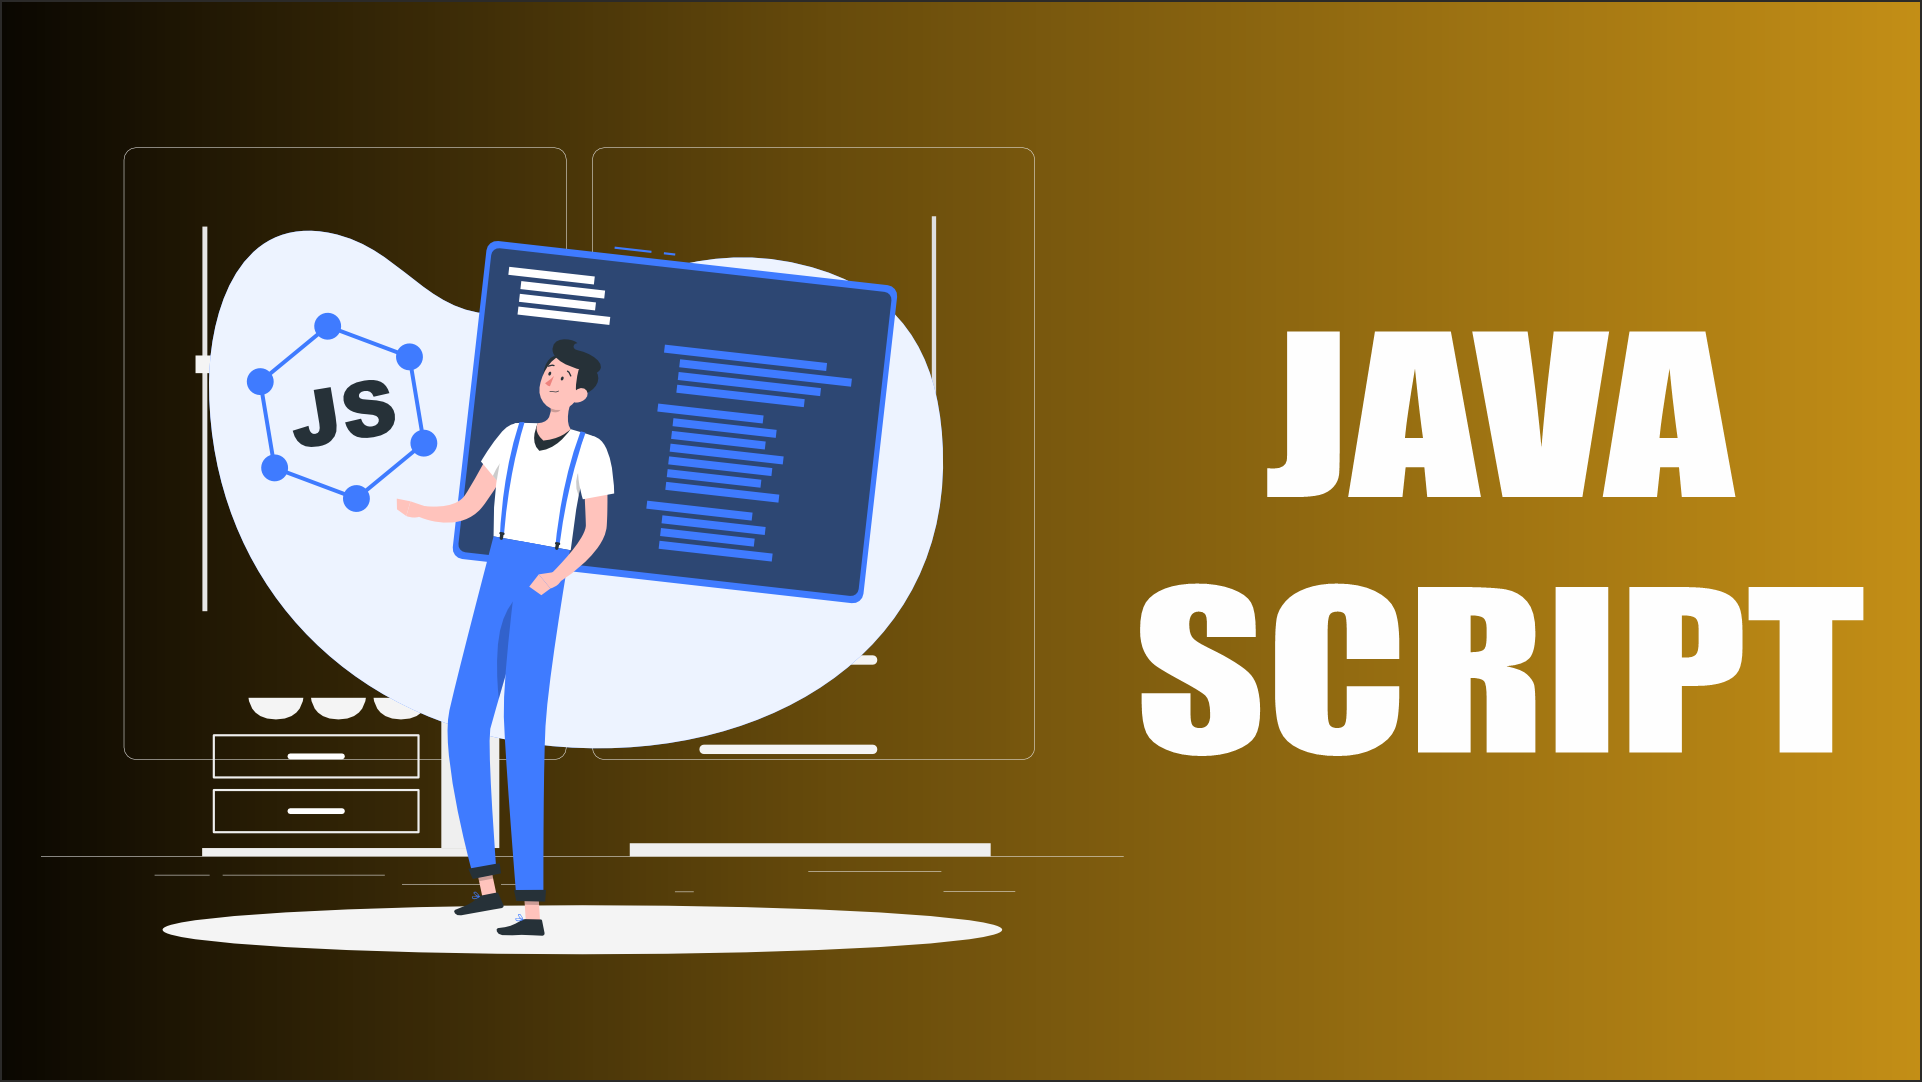 The Complete JavaScript Course